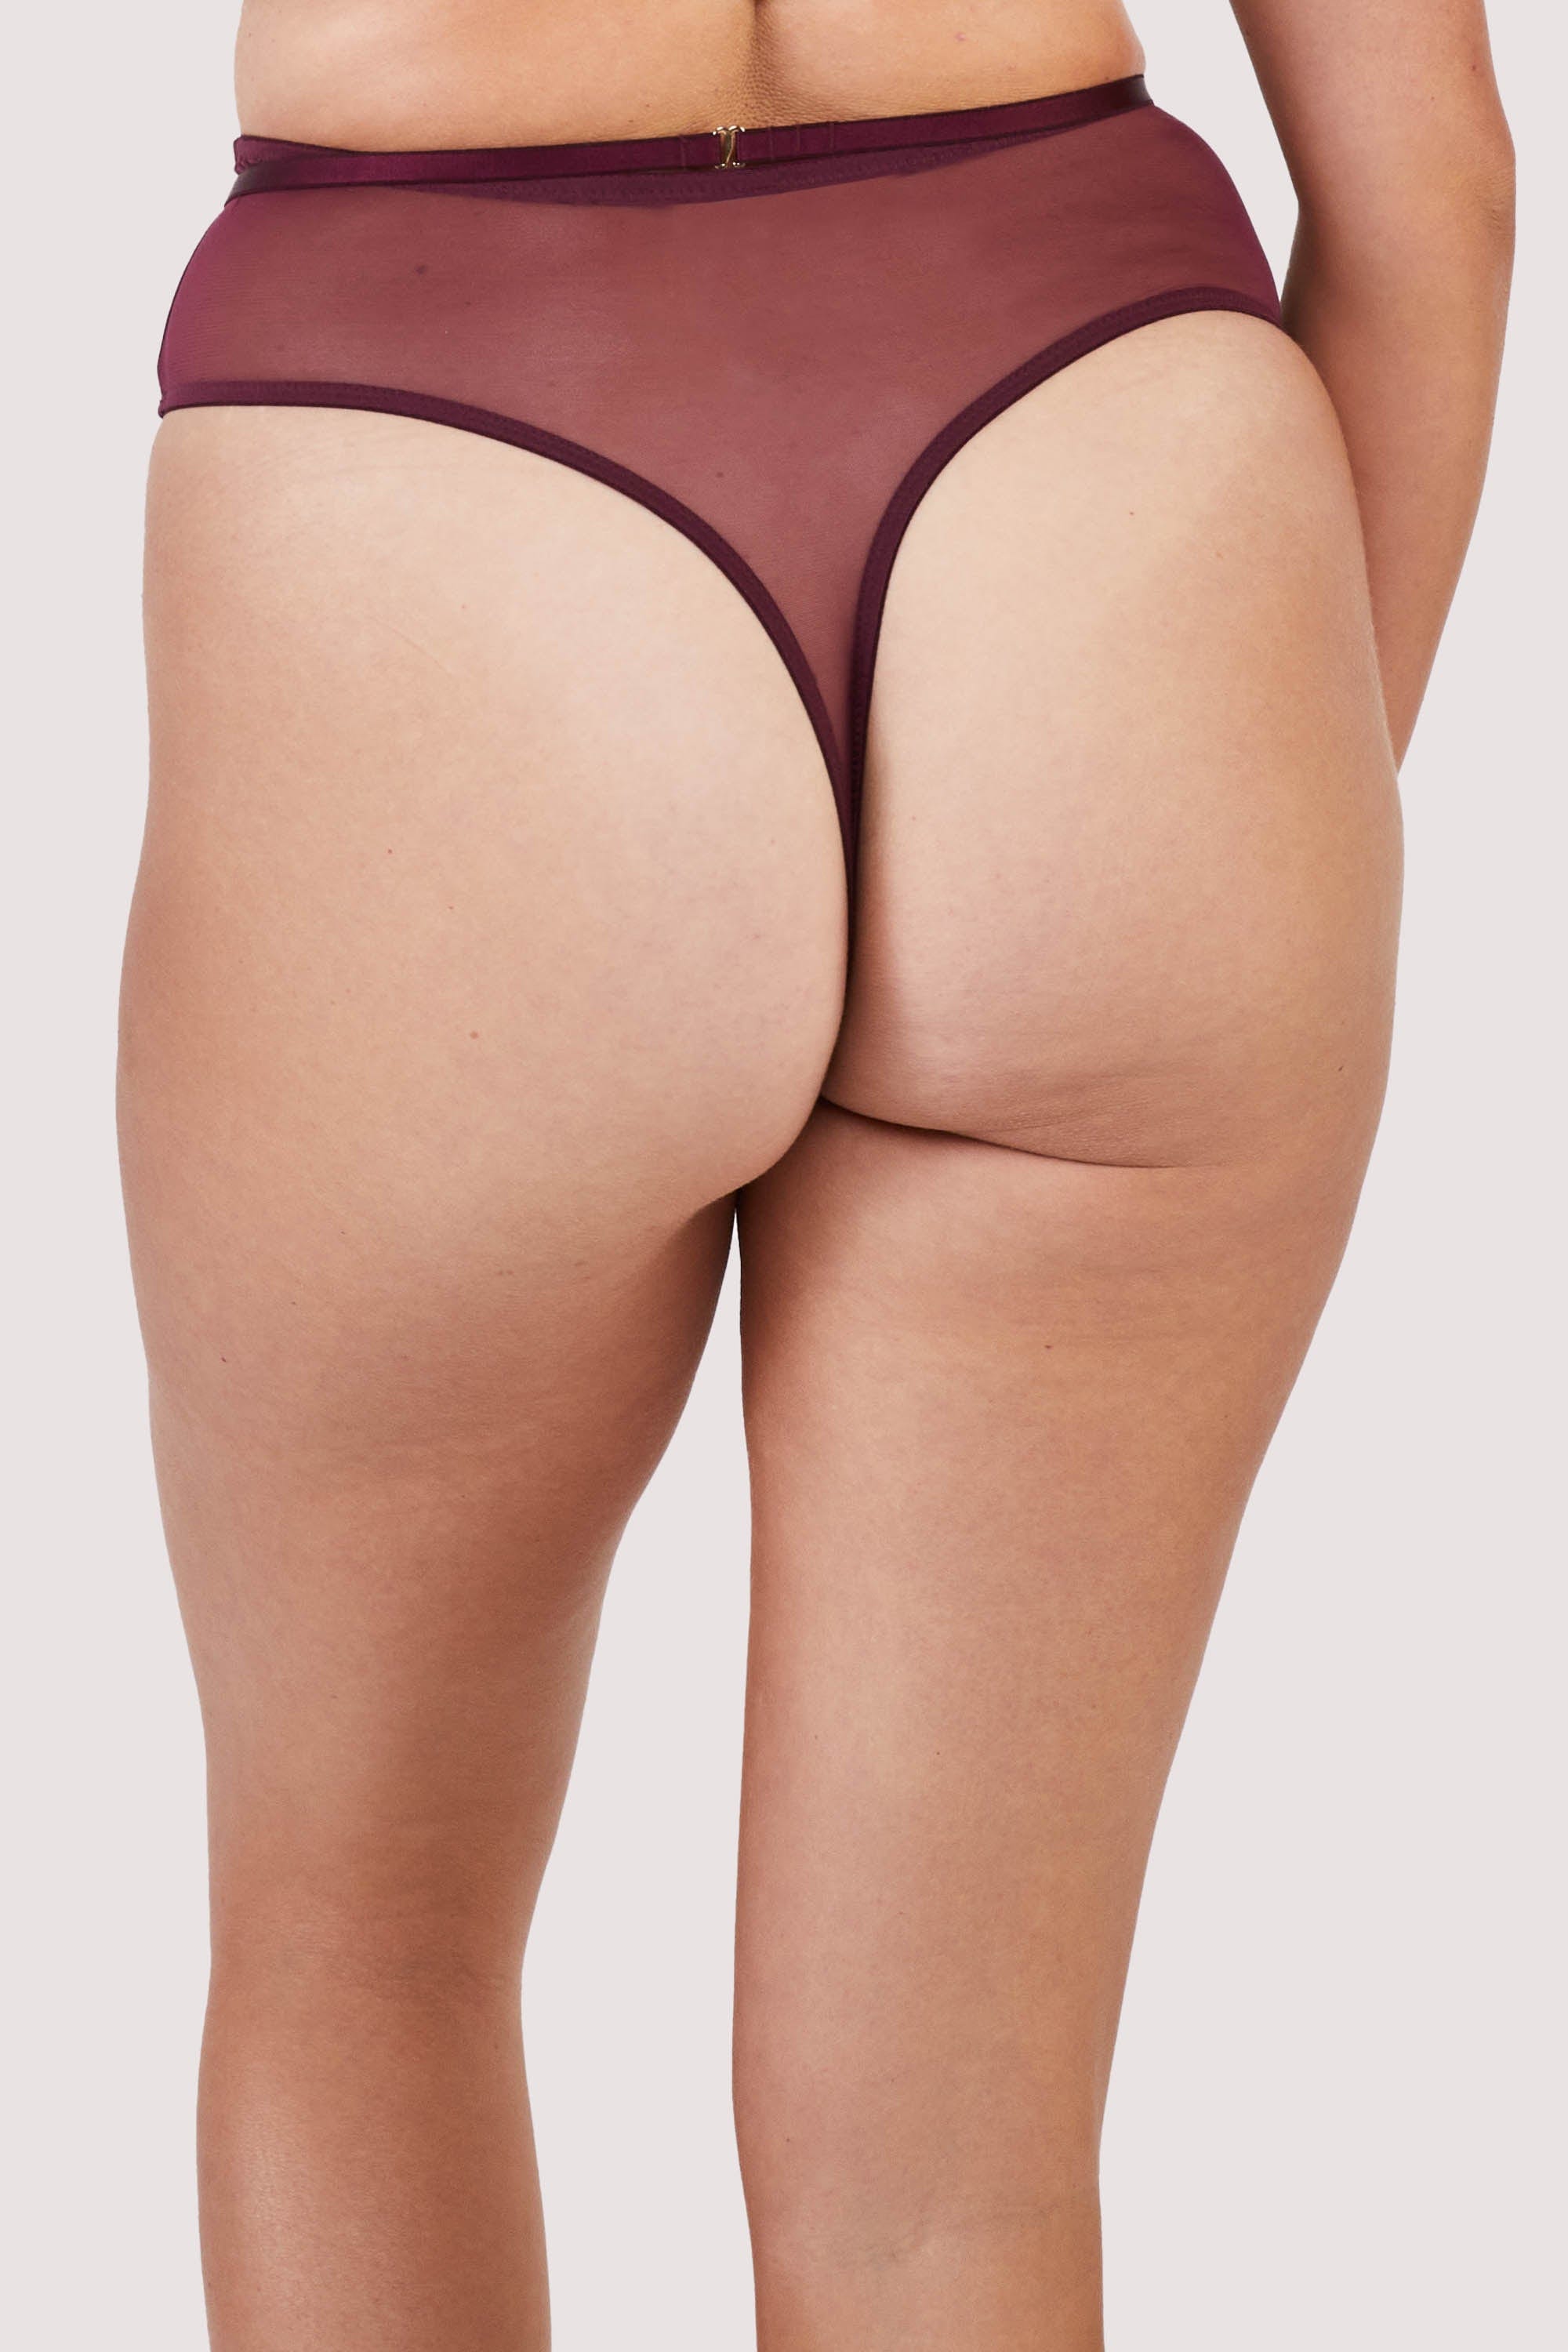 Back view of harness style thong with mesh overlay and visible gold hardware in a deep wine red/purple.